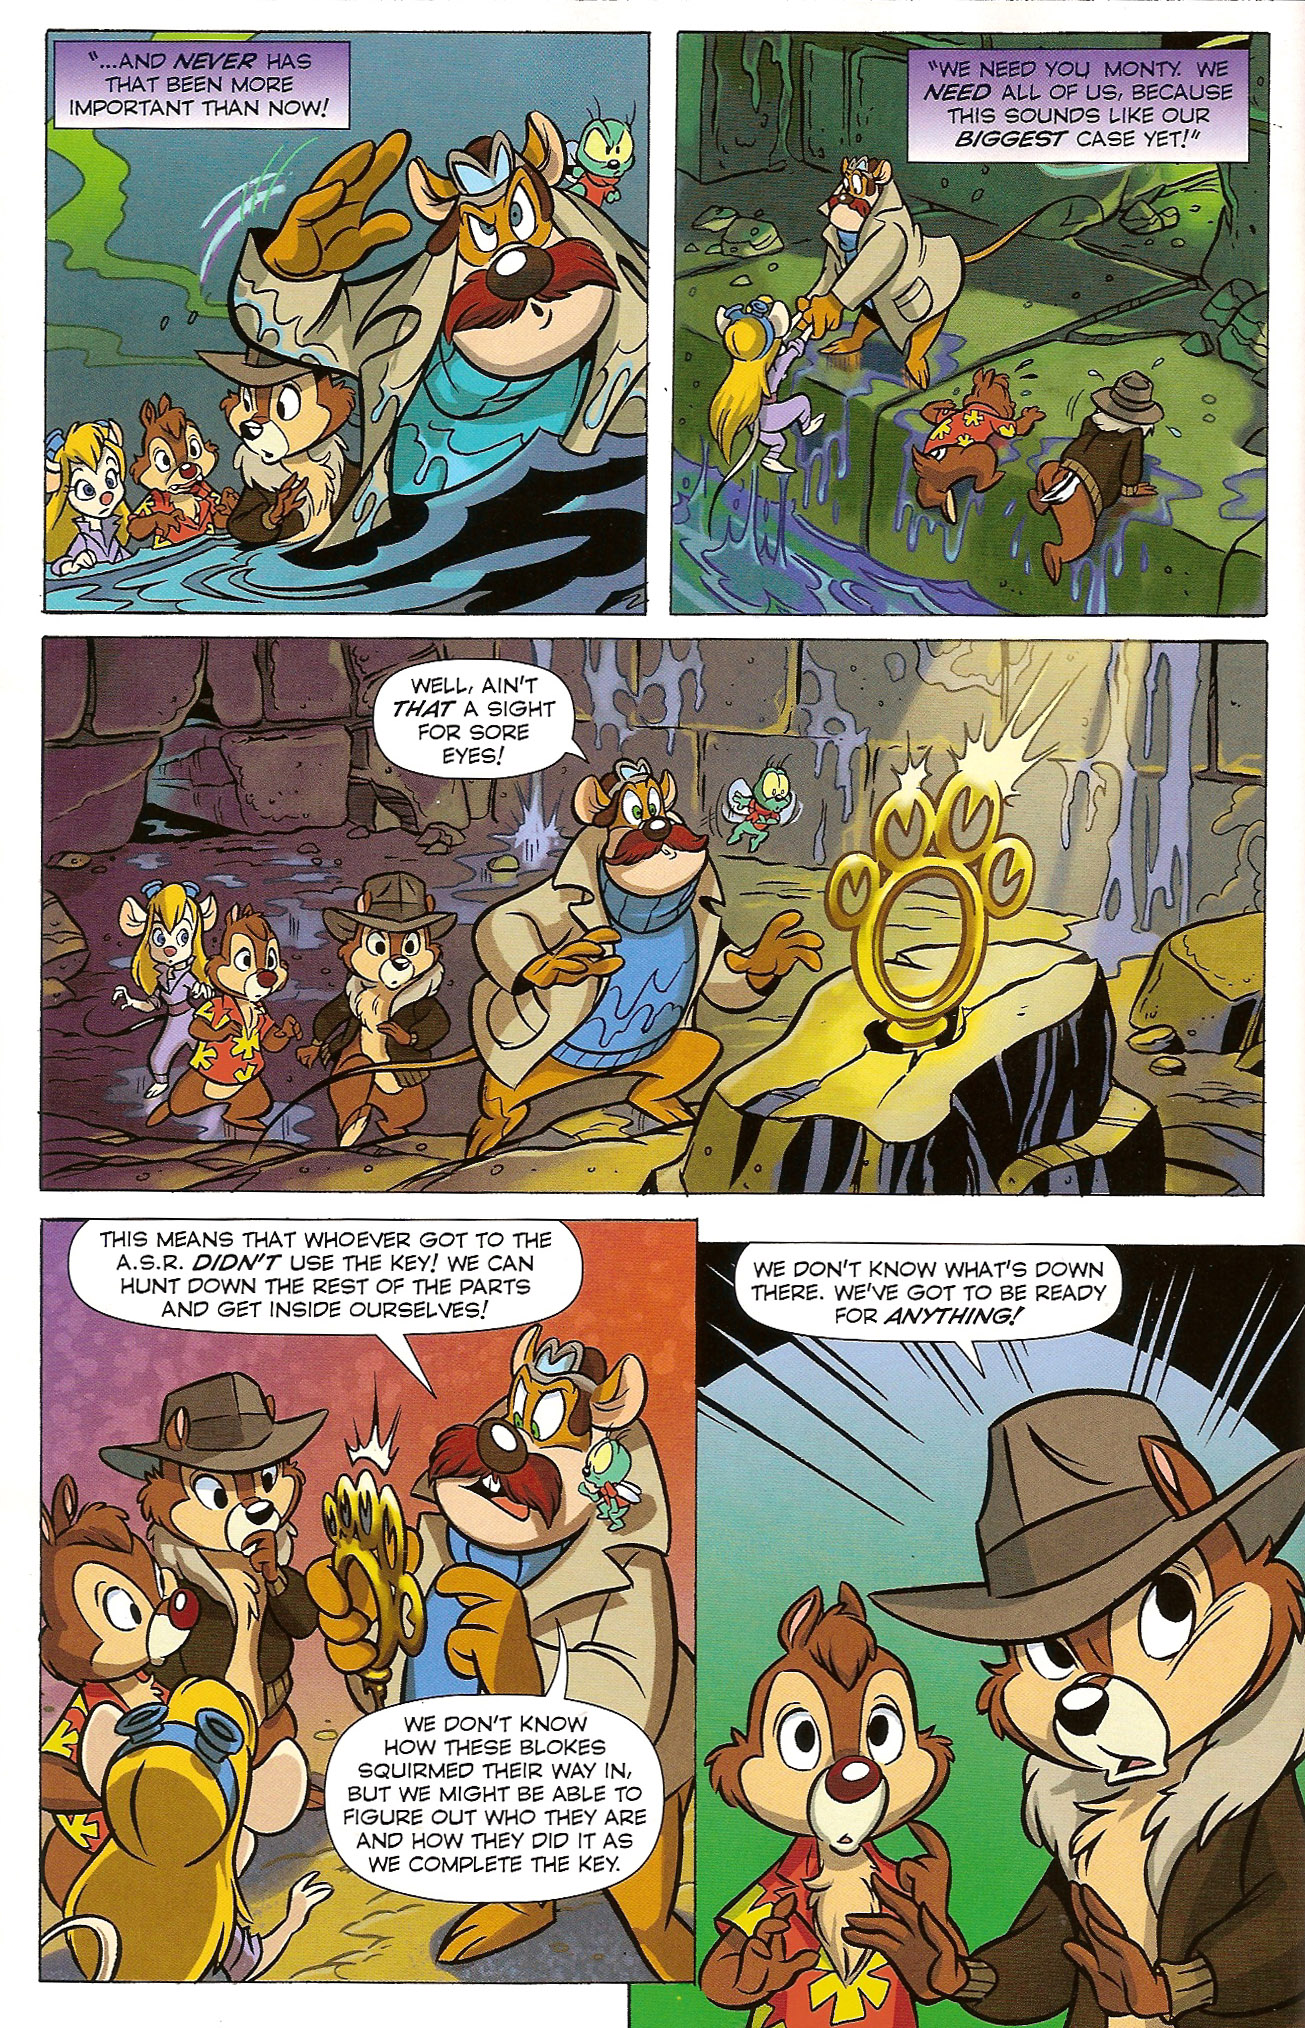 Chip N Dale Rescue Rangers Issue 1 Read Chip N Dale Rescue Rangers Issue 1 Comic Online In 